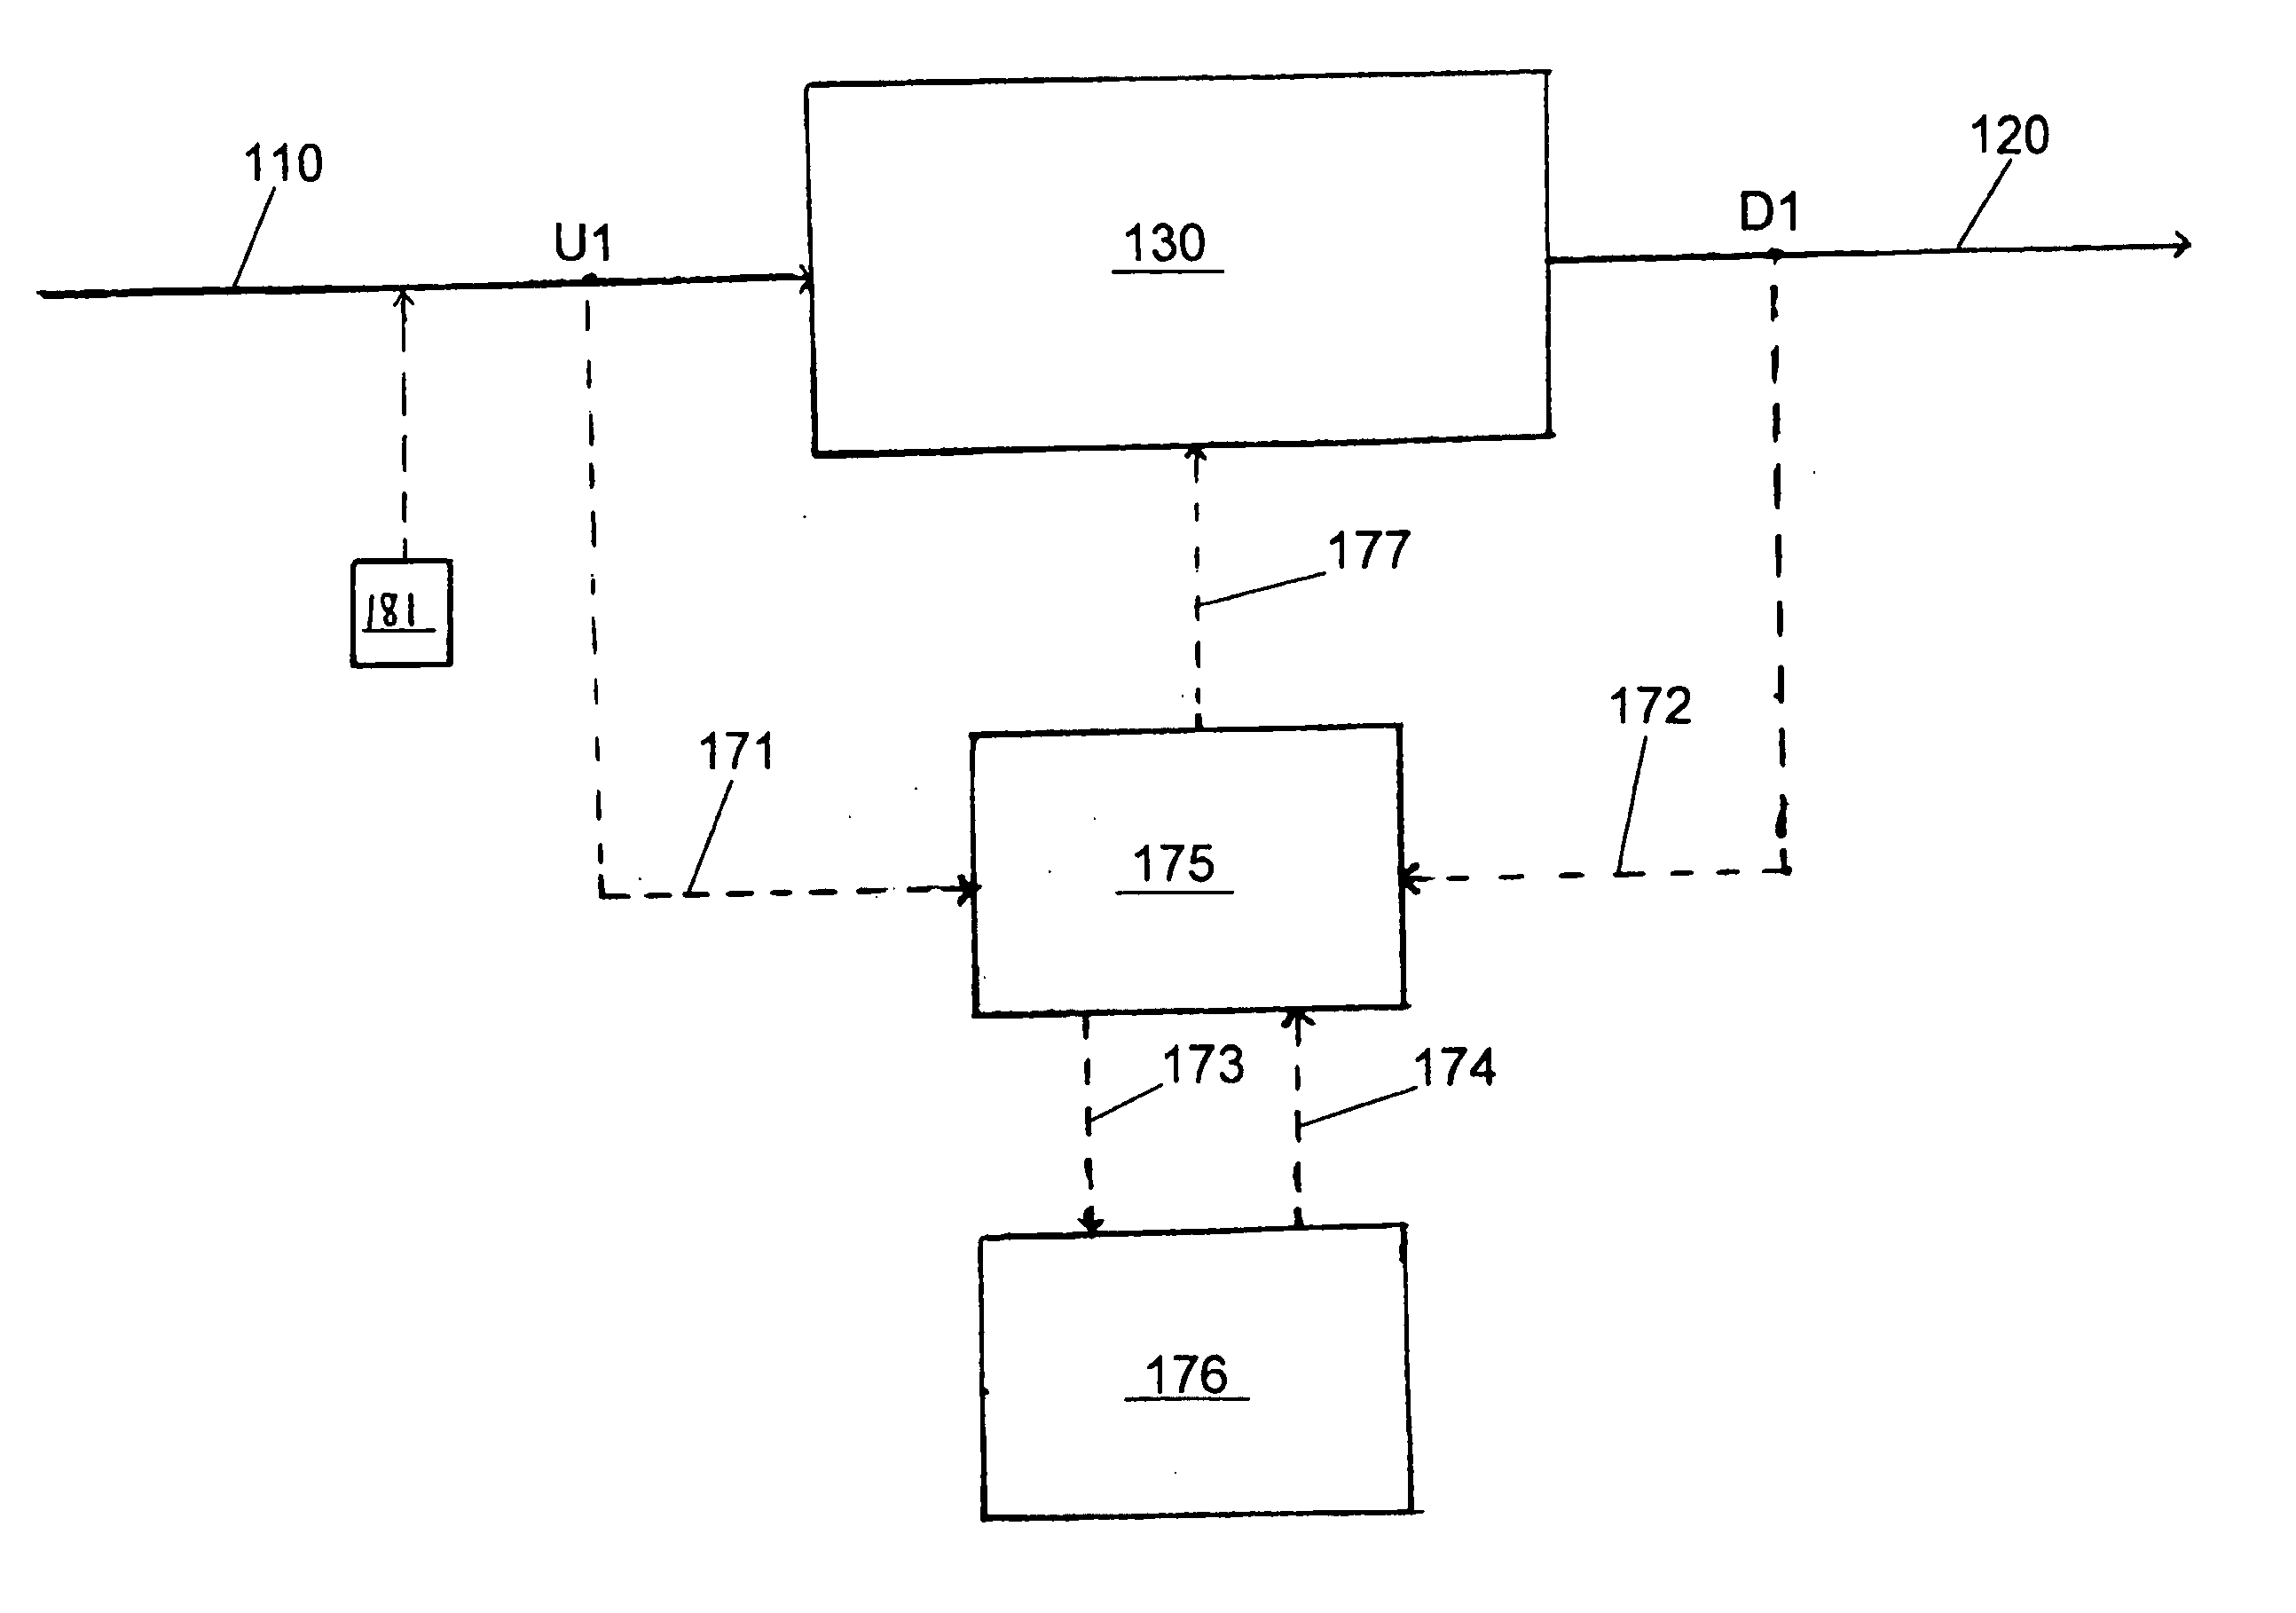 System for predicting reduction in concentration of a target material in a flow of fluid